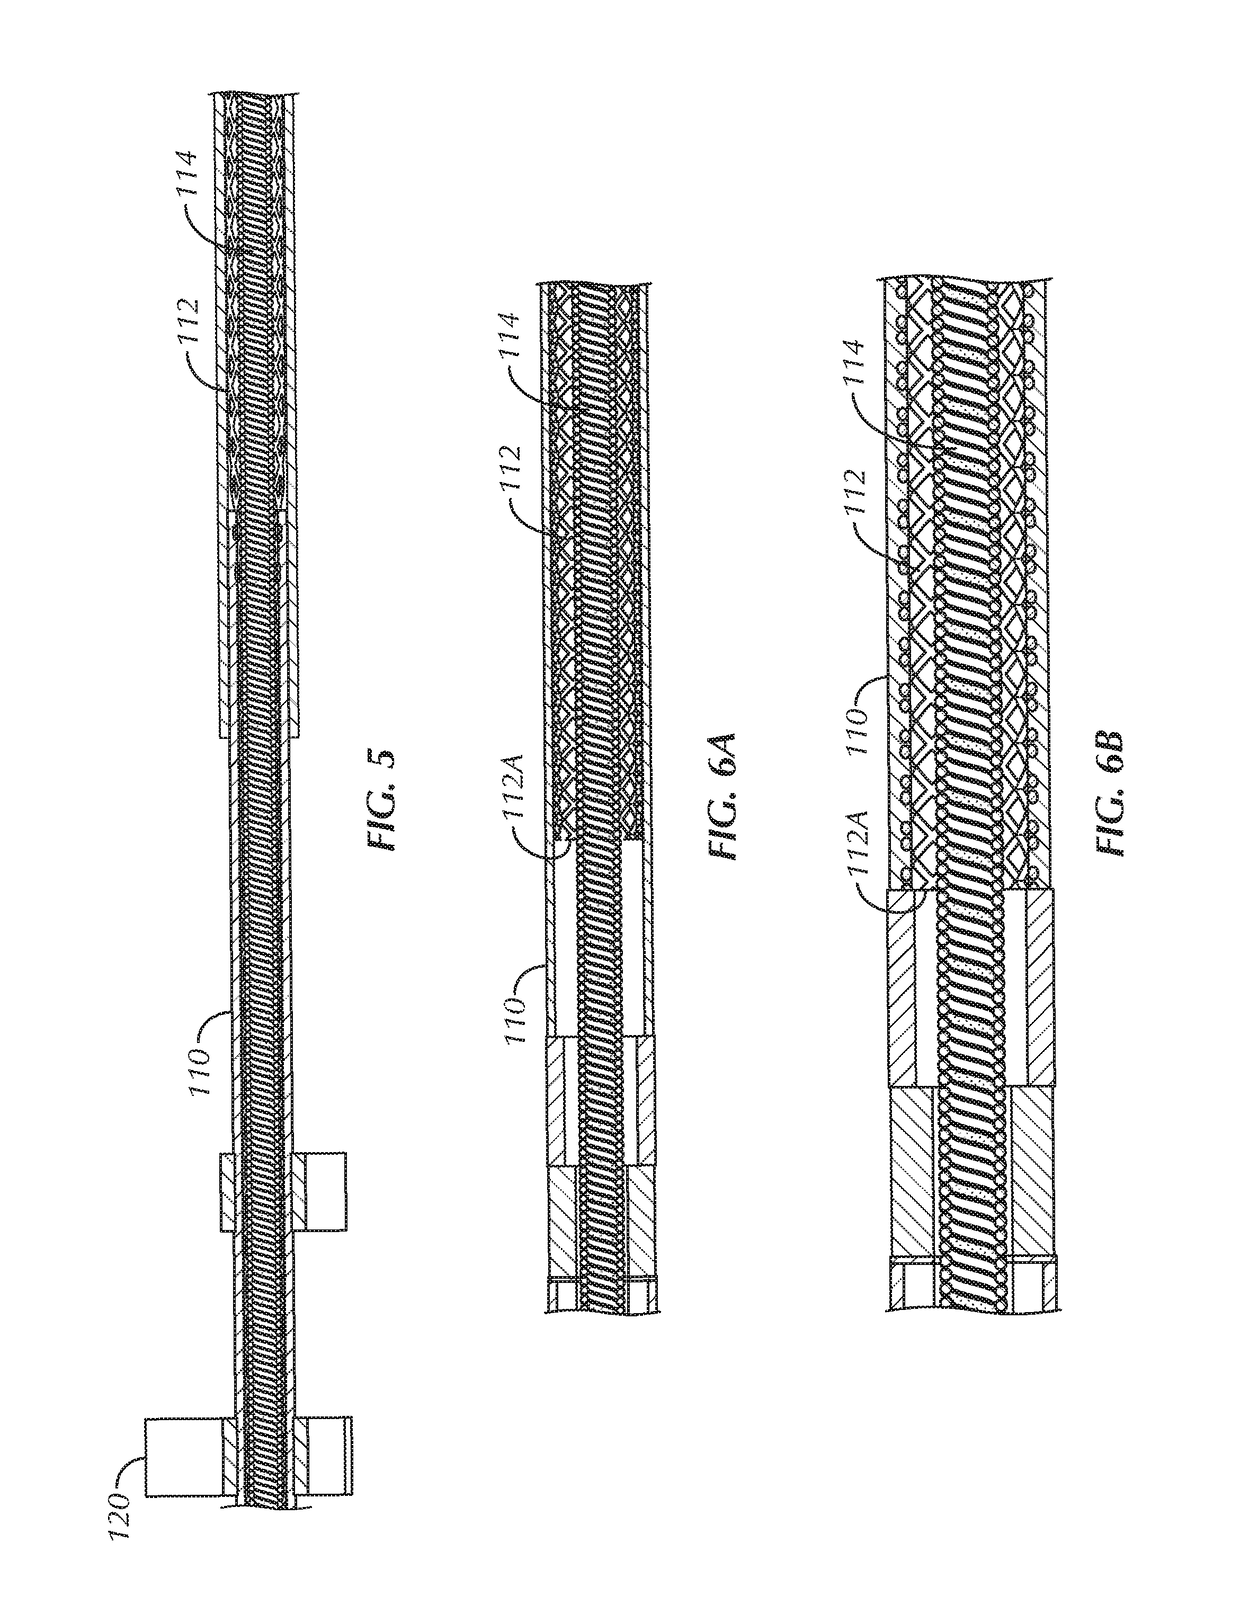 Apparatus with unencapsulated reinforcement